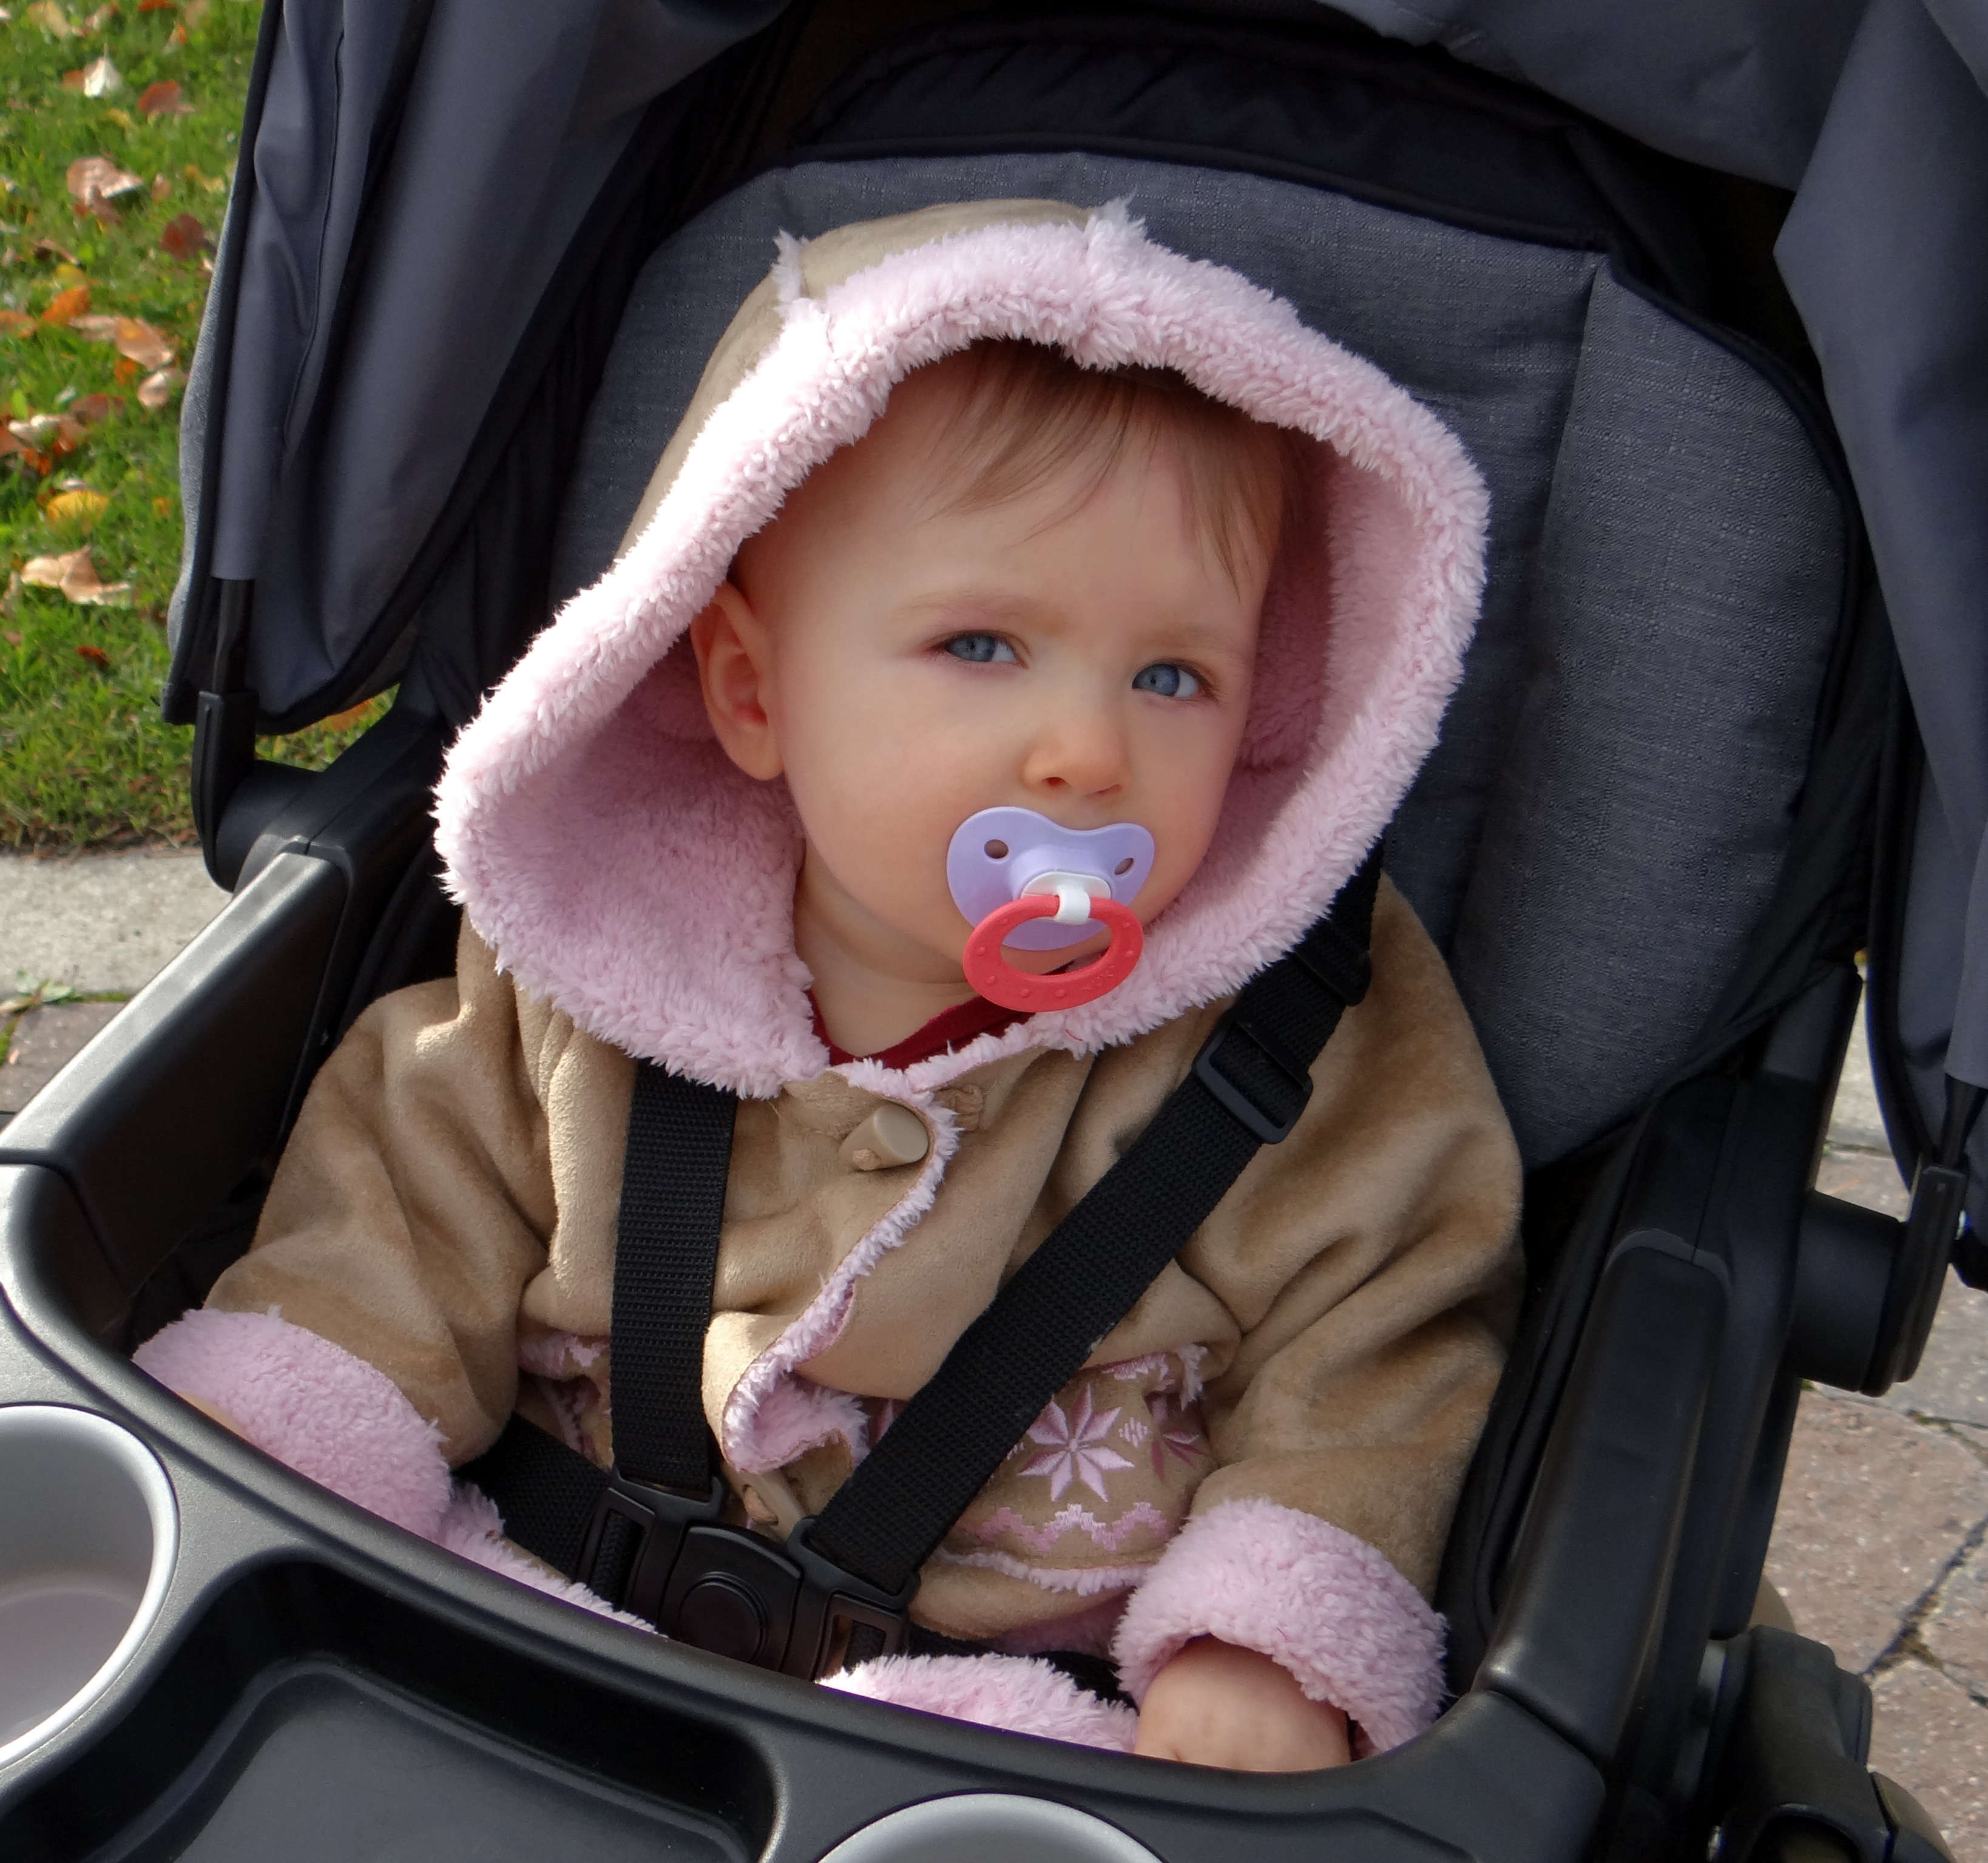 Baby wearing a jacket ready for outdoor winter fun